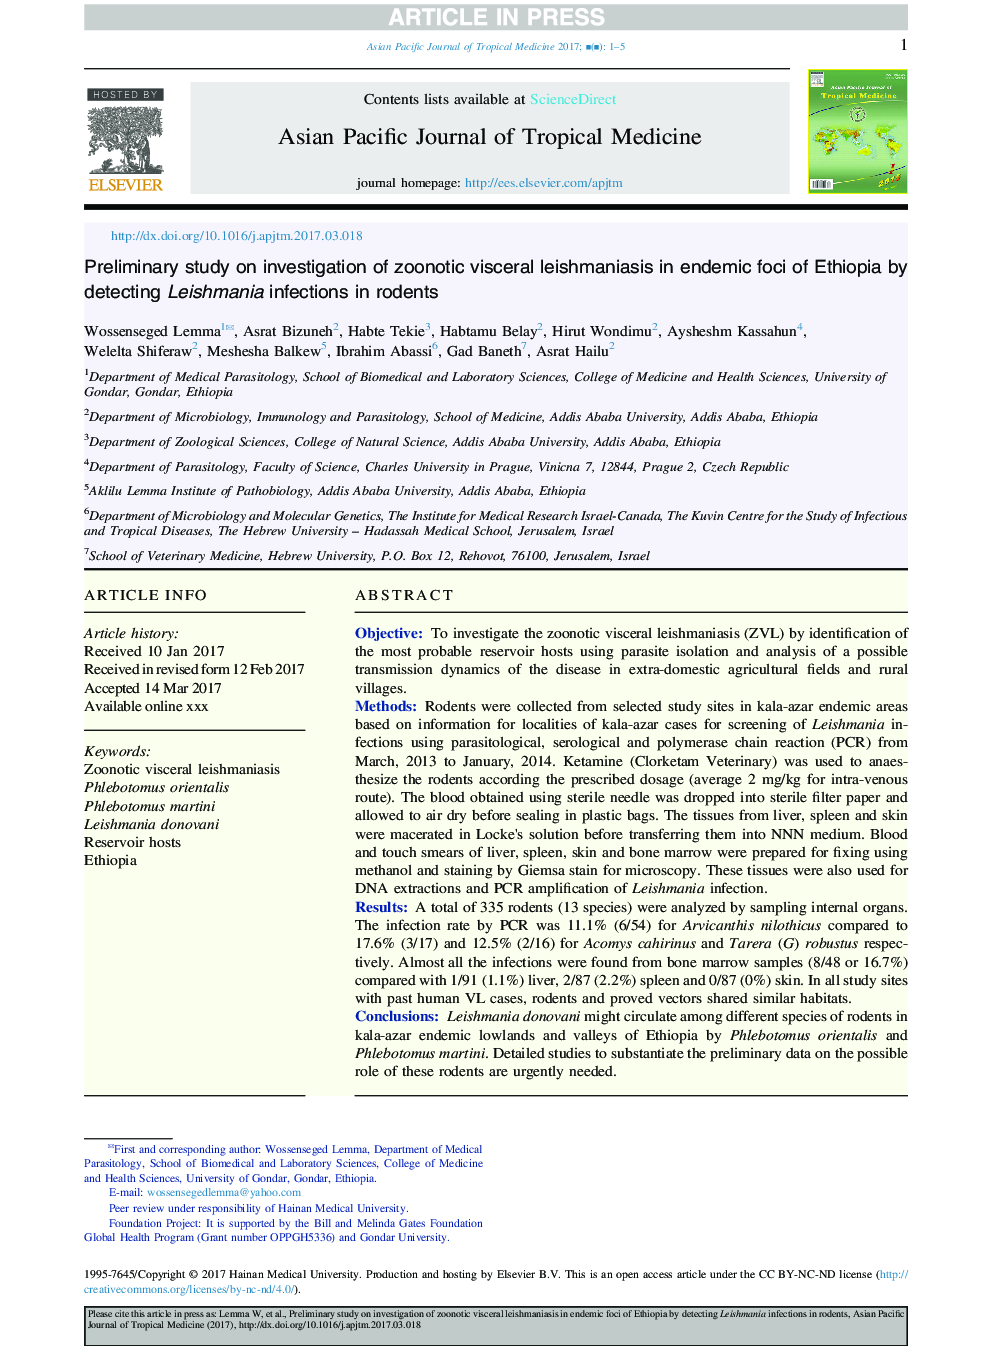 Preliminary study on investigation of zoonotic visceral leishmaniasis in endemic foci of Ethiopia by detecting Leishmania infections in rodents